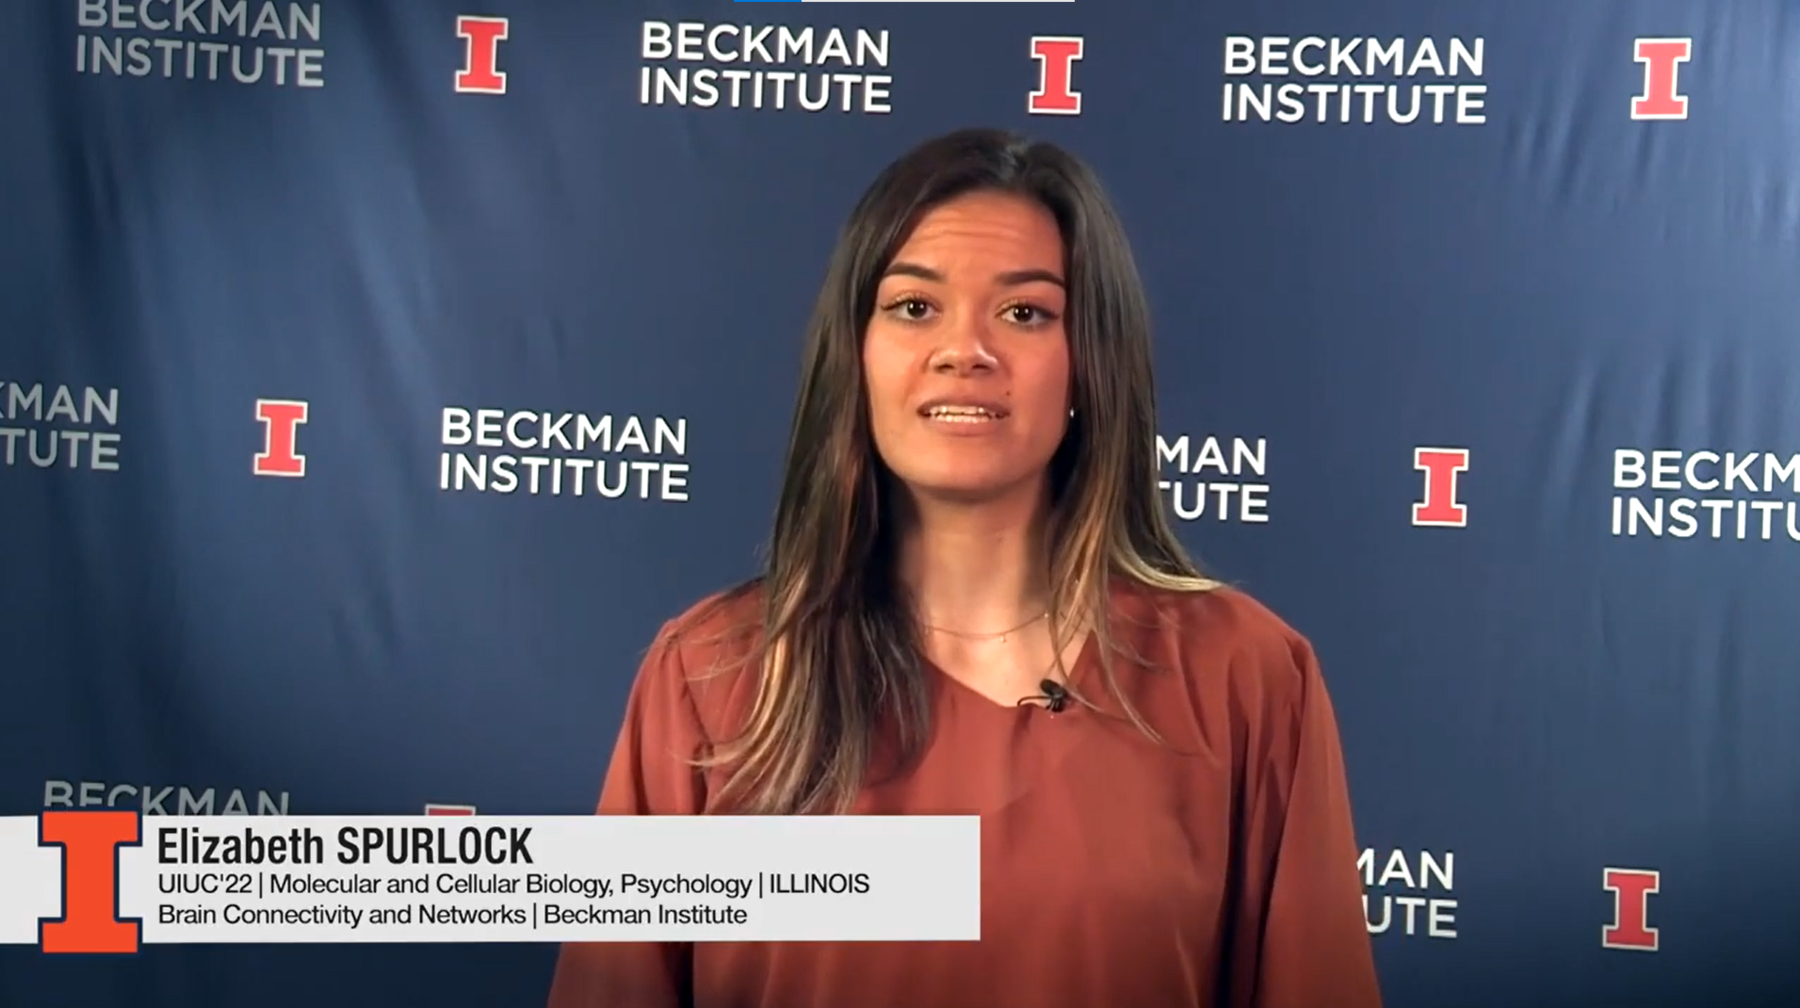 student researcher Elizabeth Spurlock in a still photo captured from a linked video